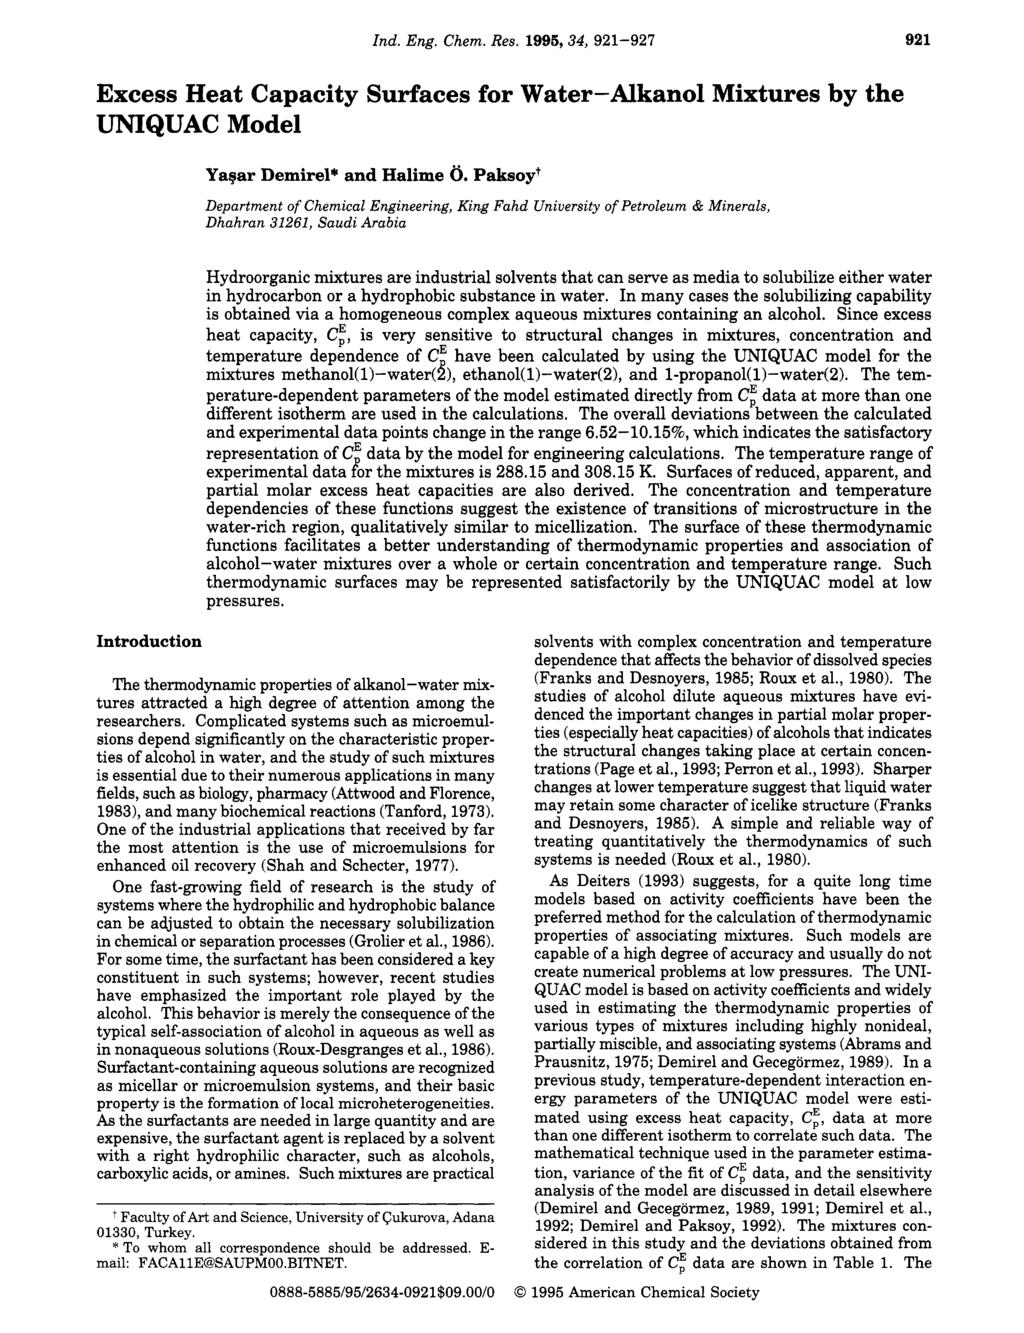 Ind. Eng. Chem. Res. 1996,34, 921-927 92 1 Excess Heat Capacity Surfaces for Water-Alkanol Mixtures by the UNIQUAC Model Yagar Demirel* and Halime 6.